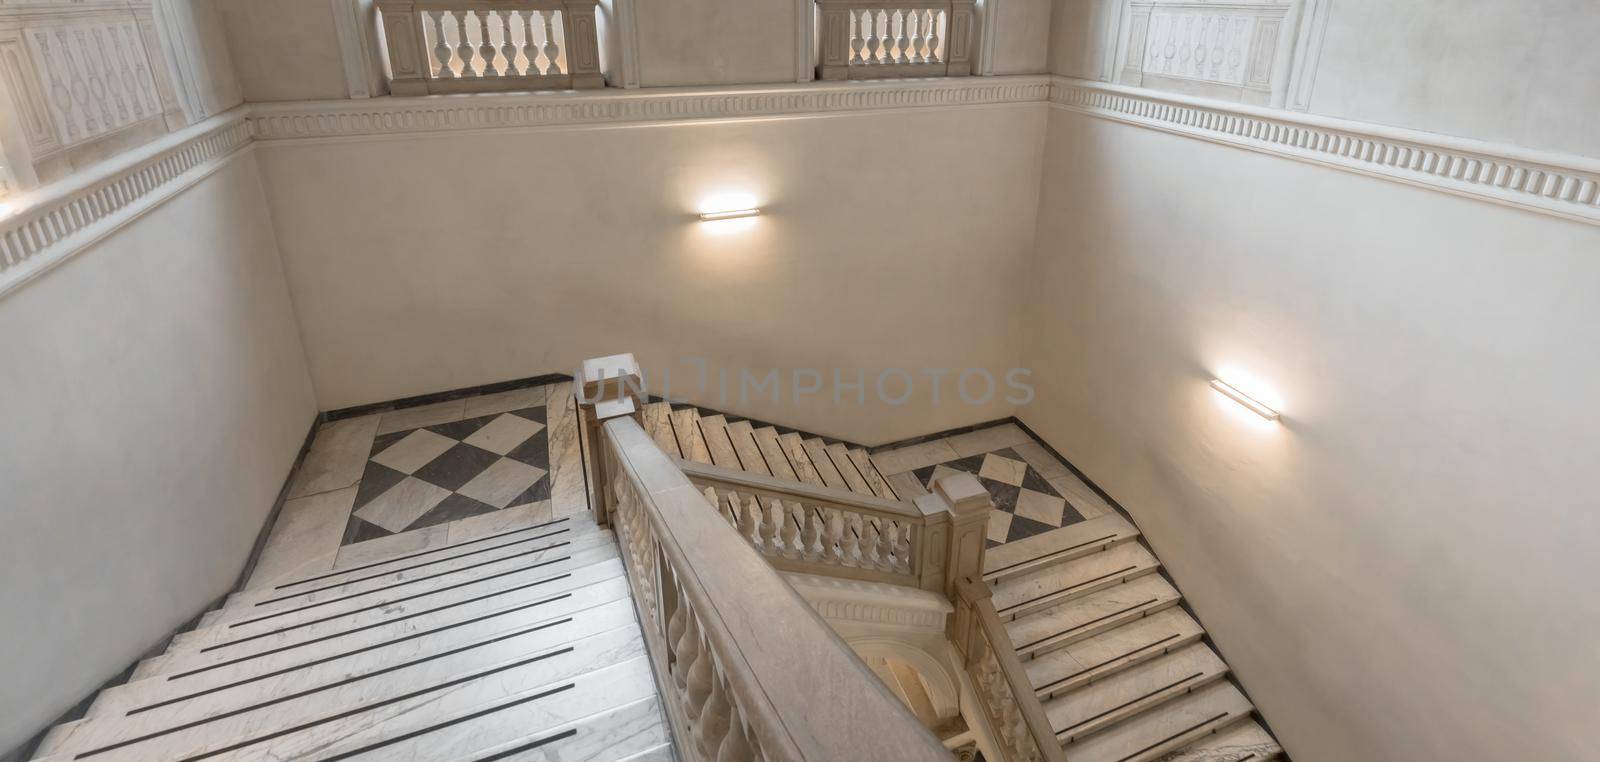 Luxury staircase made of marble in an antique Italian palace by Perseomedusa